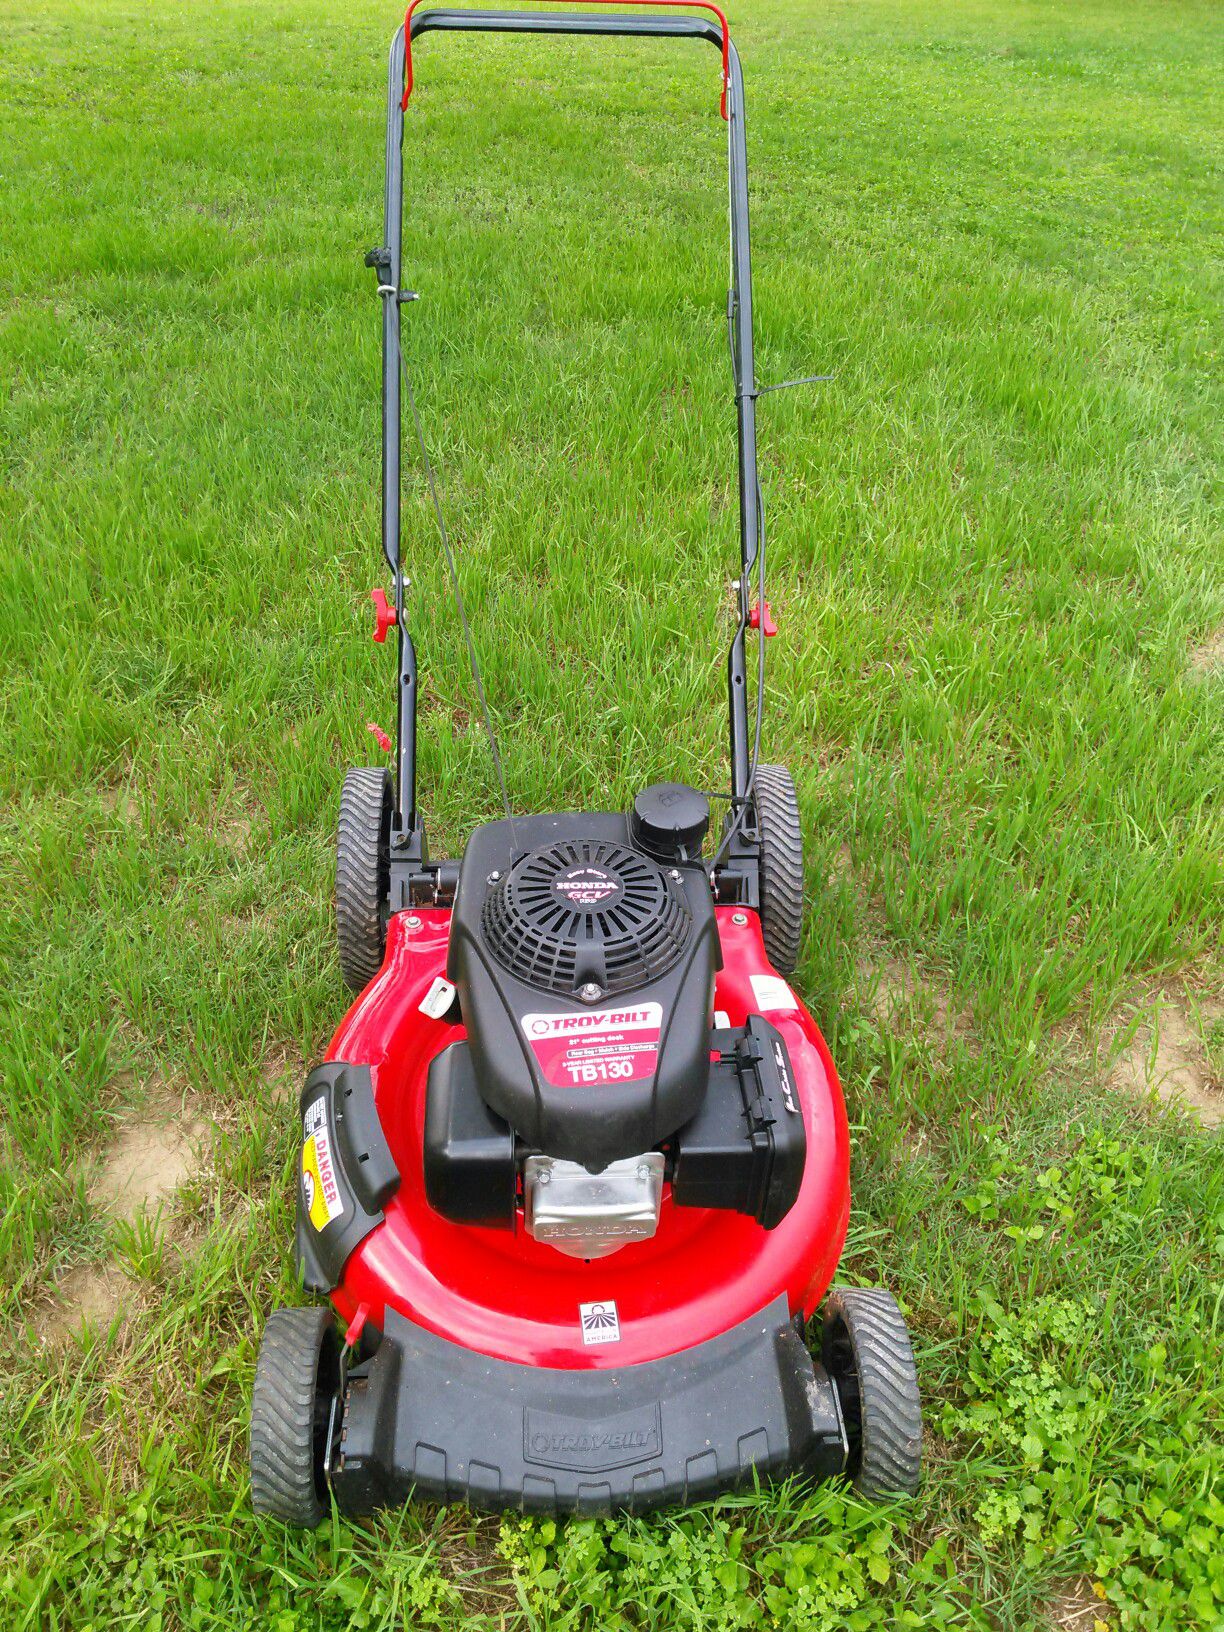 Almost in brand new condition Troy-Bilt push lawn mower with Honda engine works absolutely great guaranteed to turn on on first pull